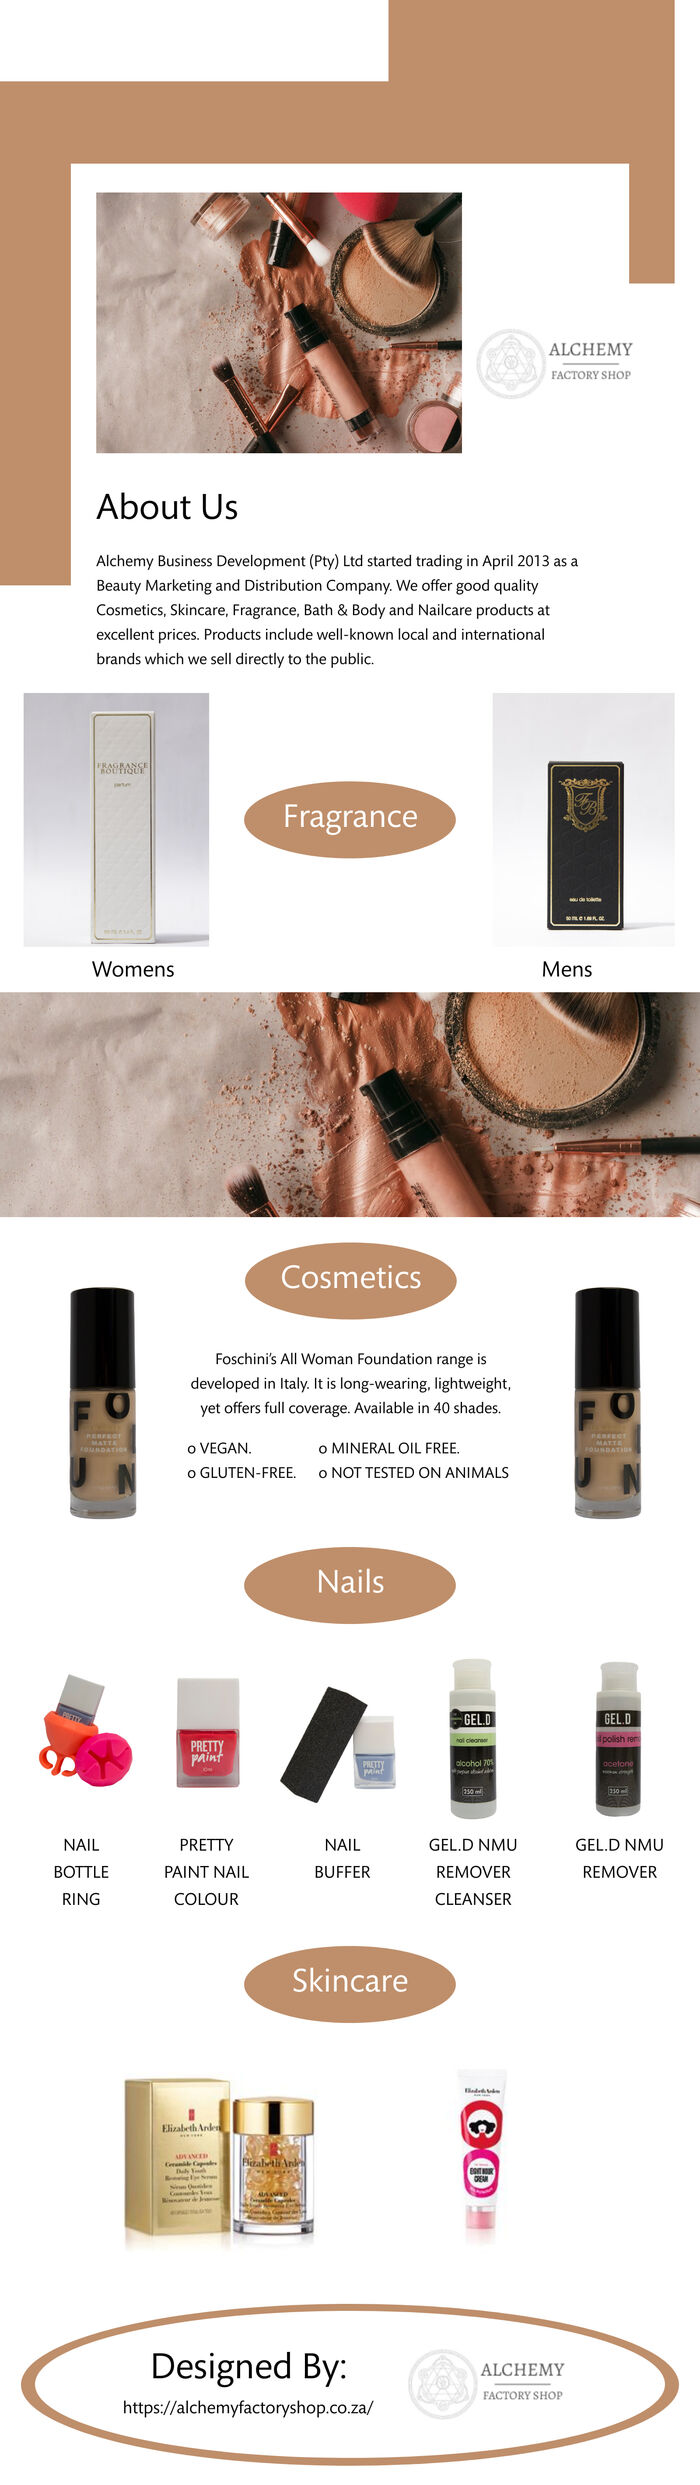 This infographic is designed by Alchemy Cosmetics Factory Shop